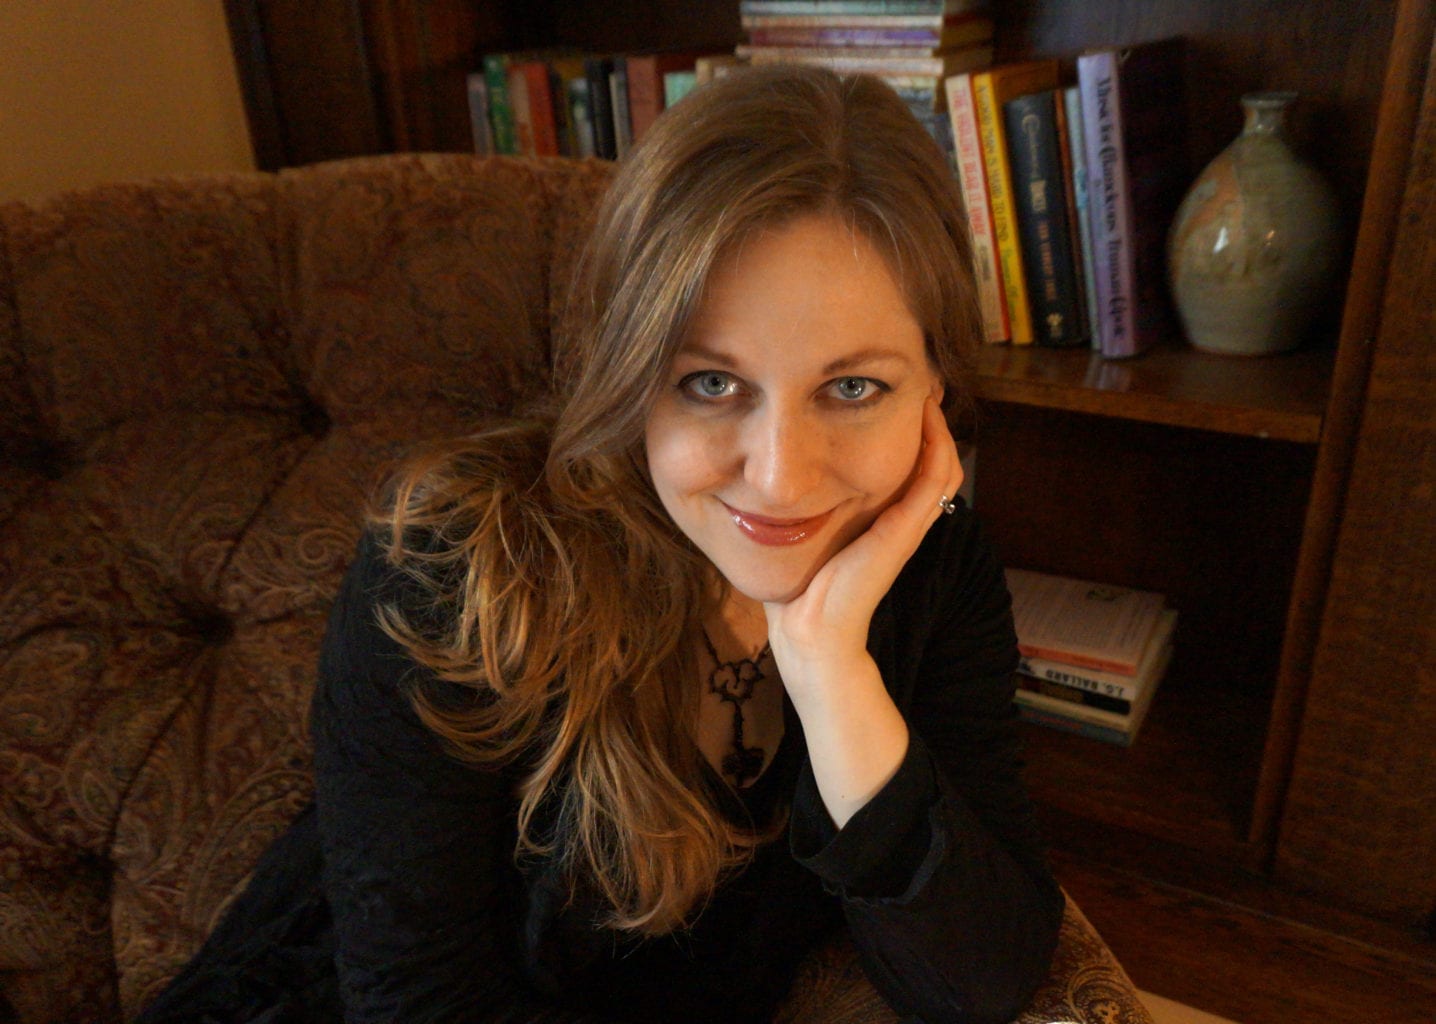 Interview with Minnesota Book Award Finalist, author Jacqueline West.